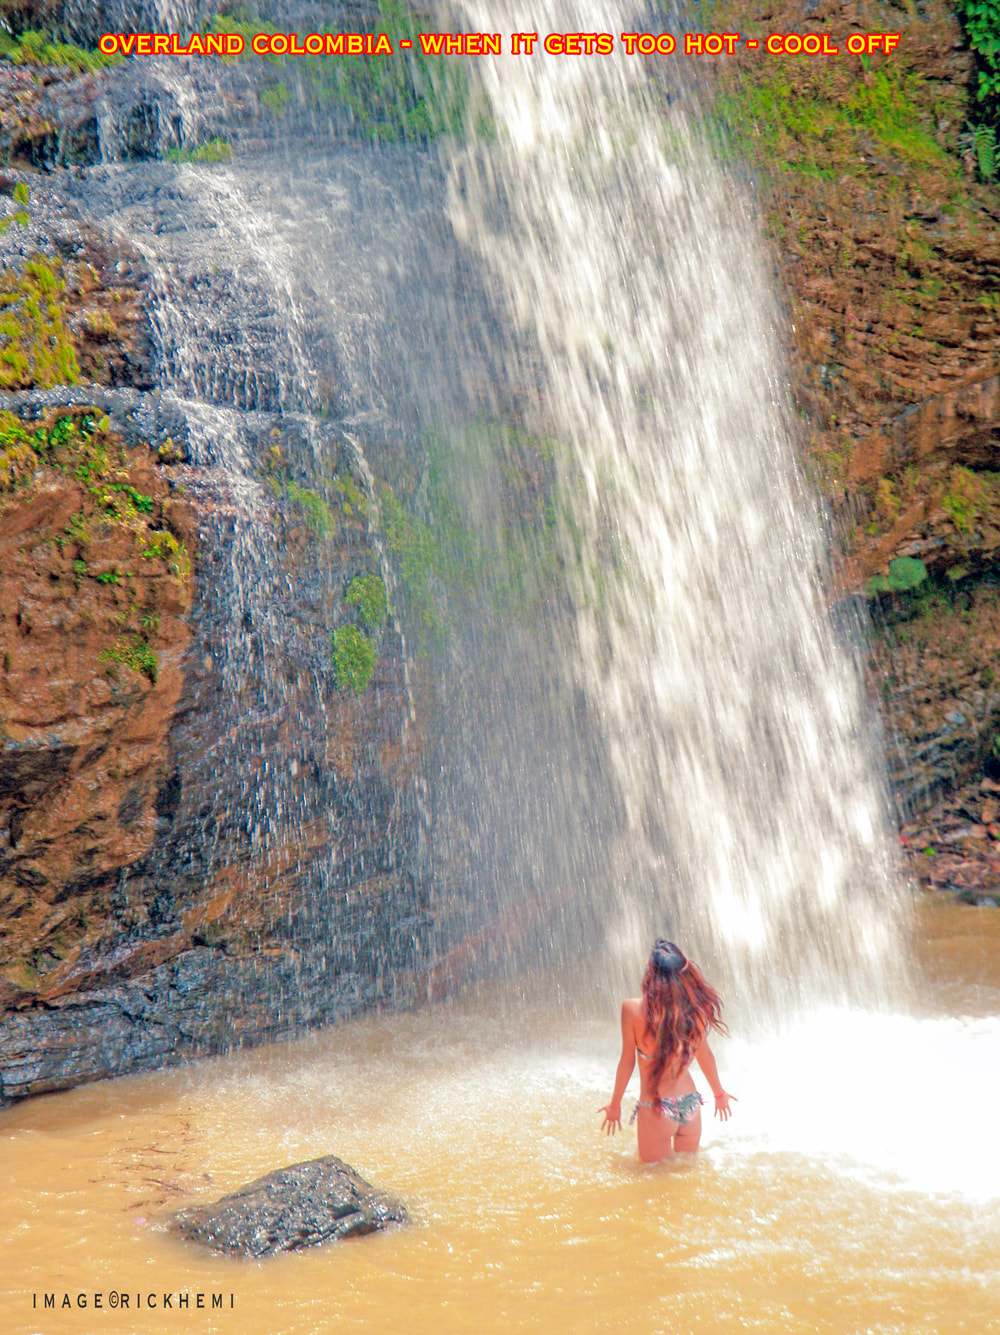 solo overland travel Colombia, isolated waterfall chill out soak, image by Rick Hemi